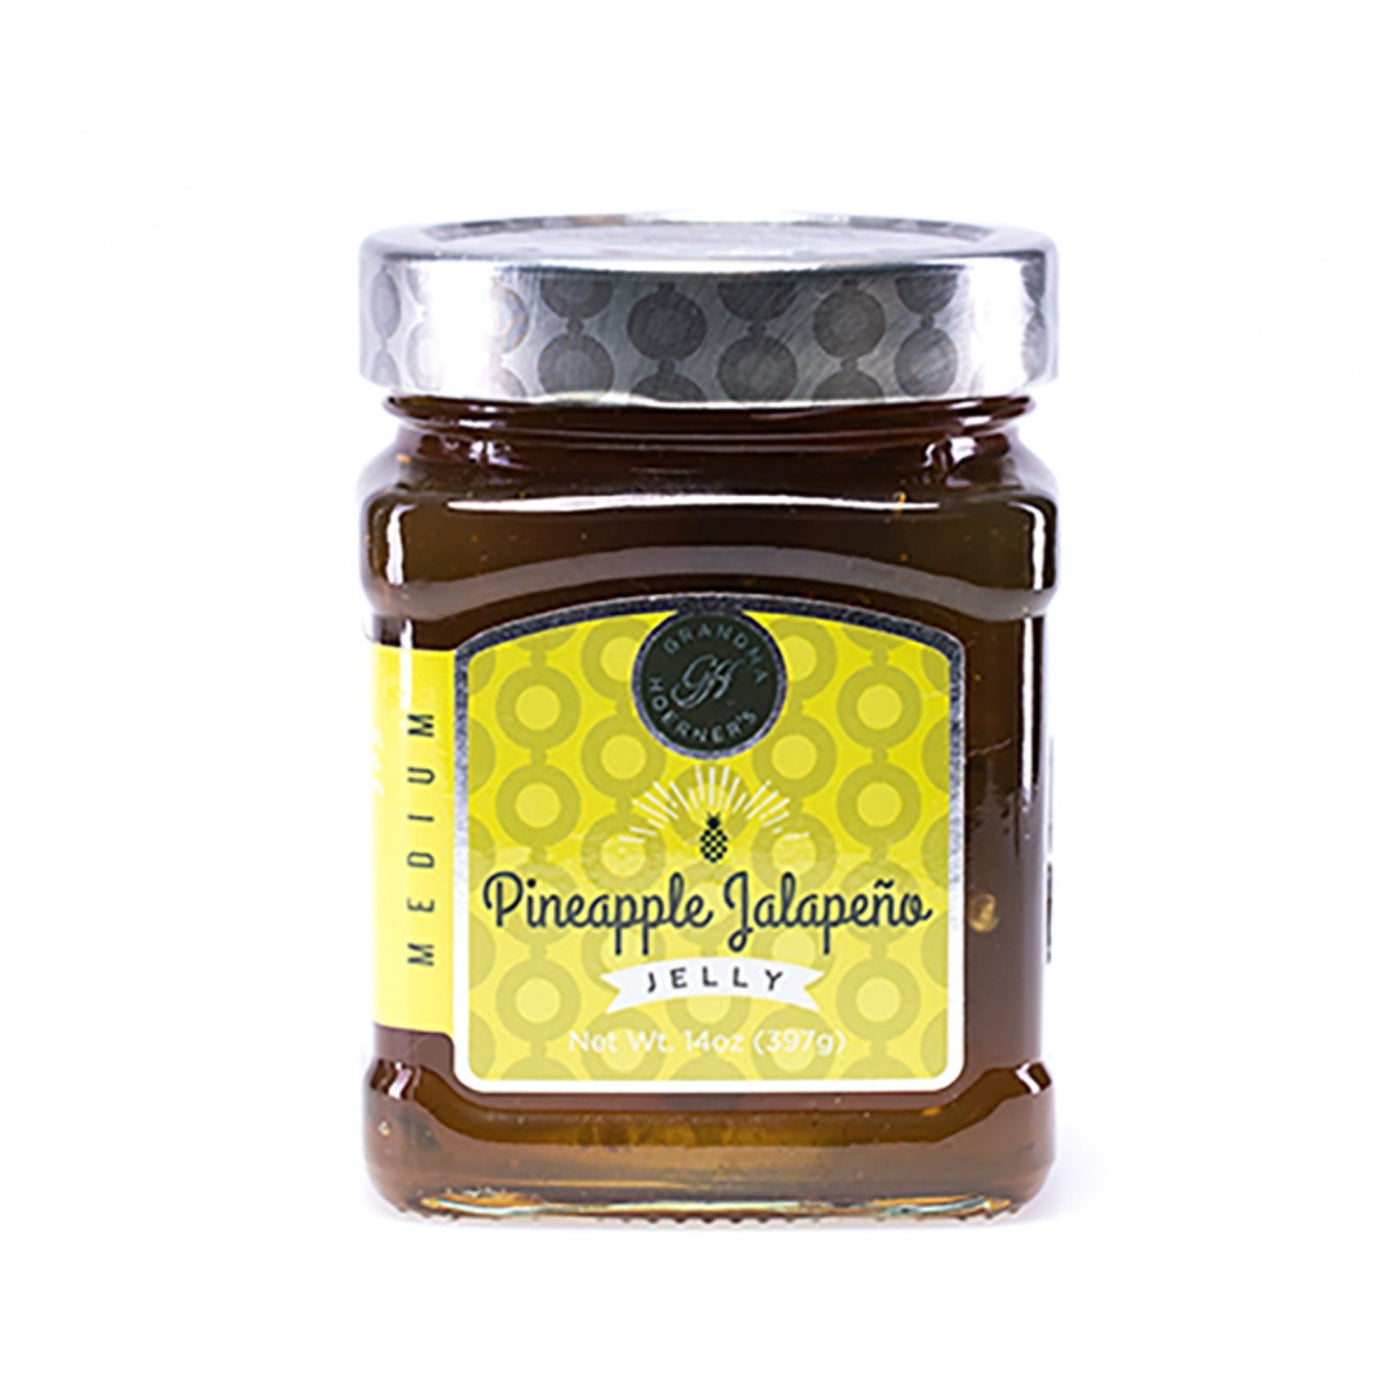 GH - Pineapple Jalapeno Jelly